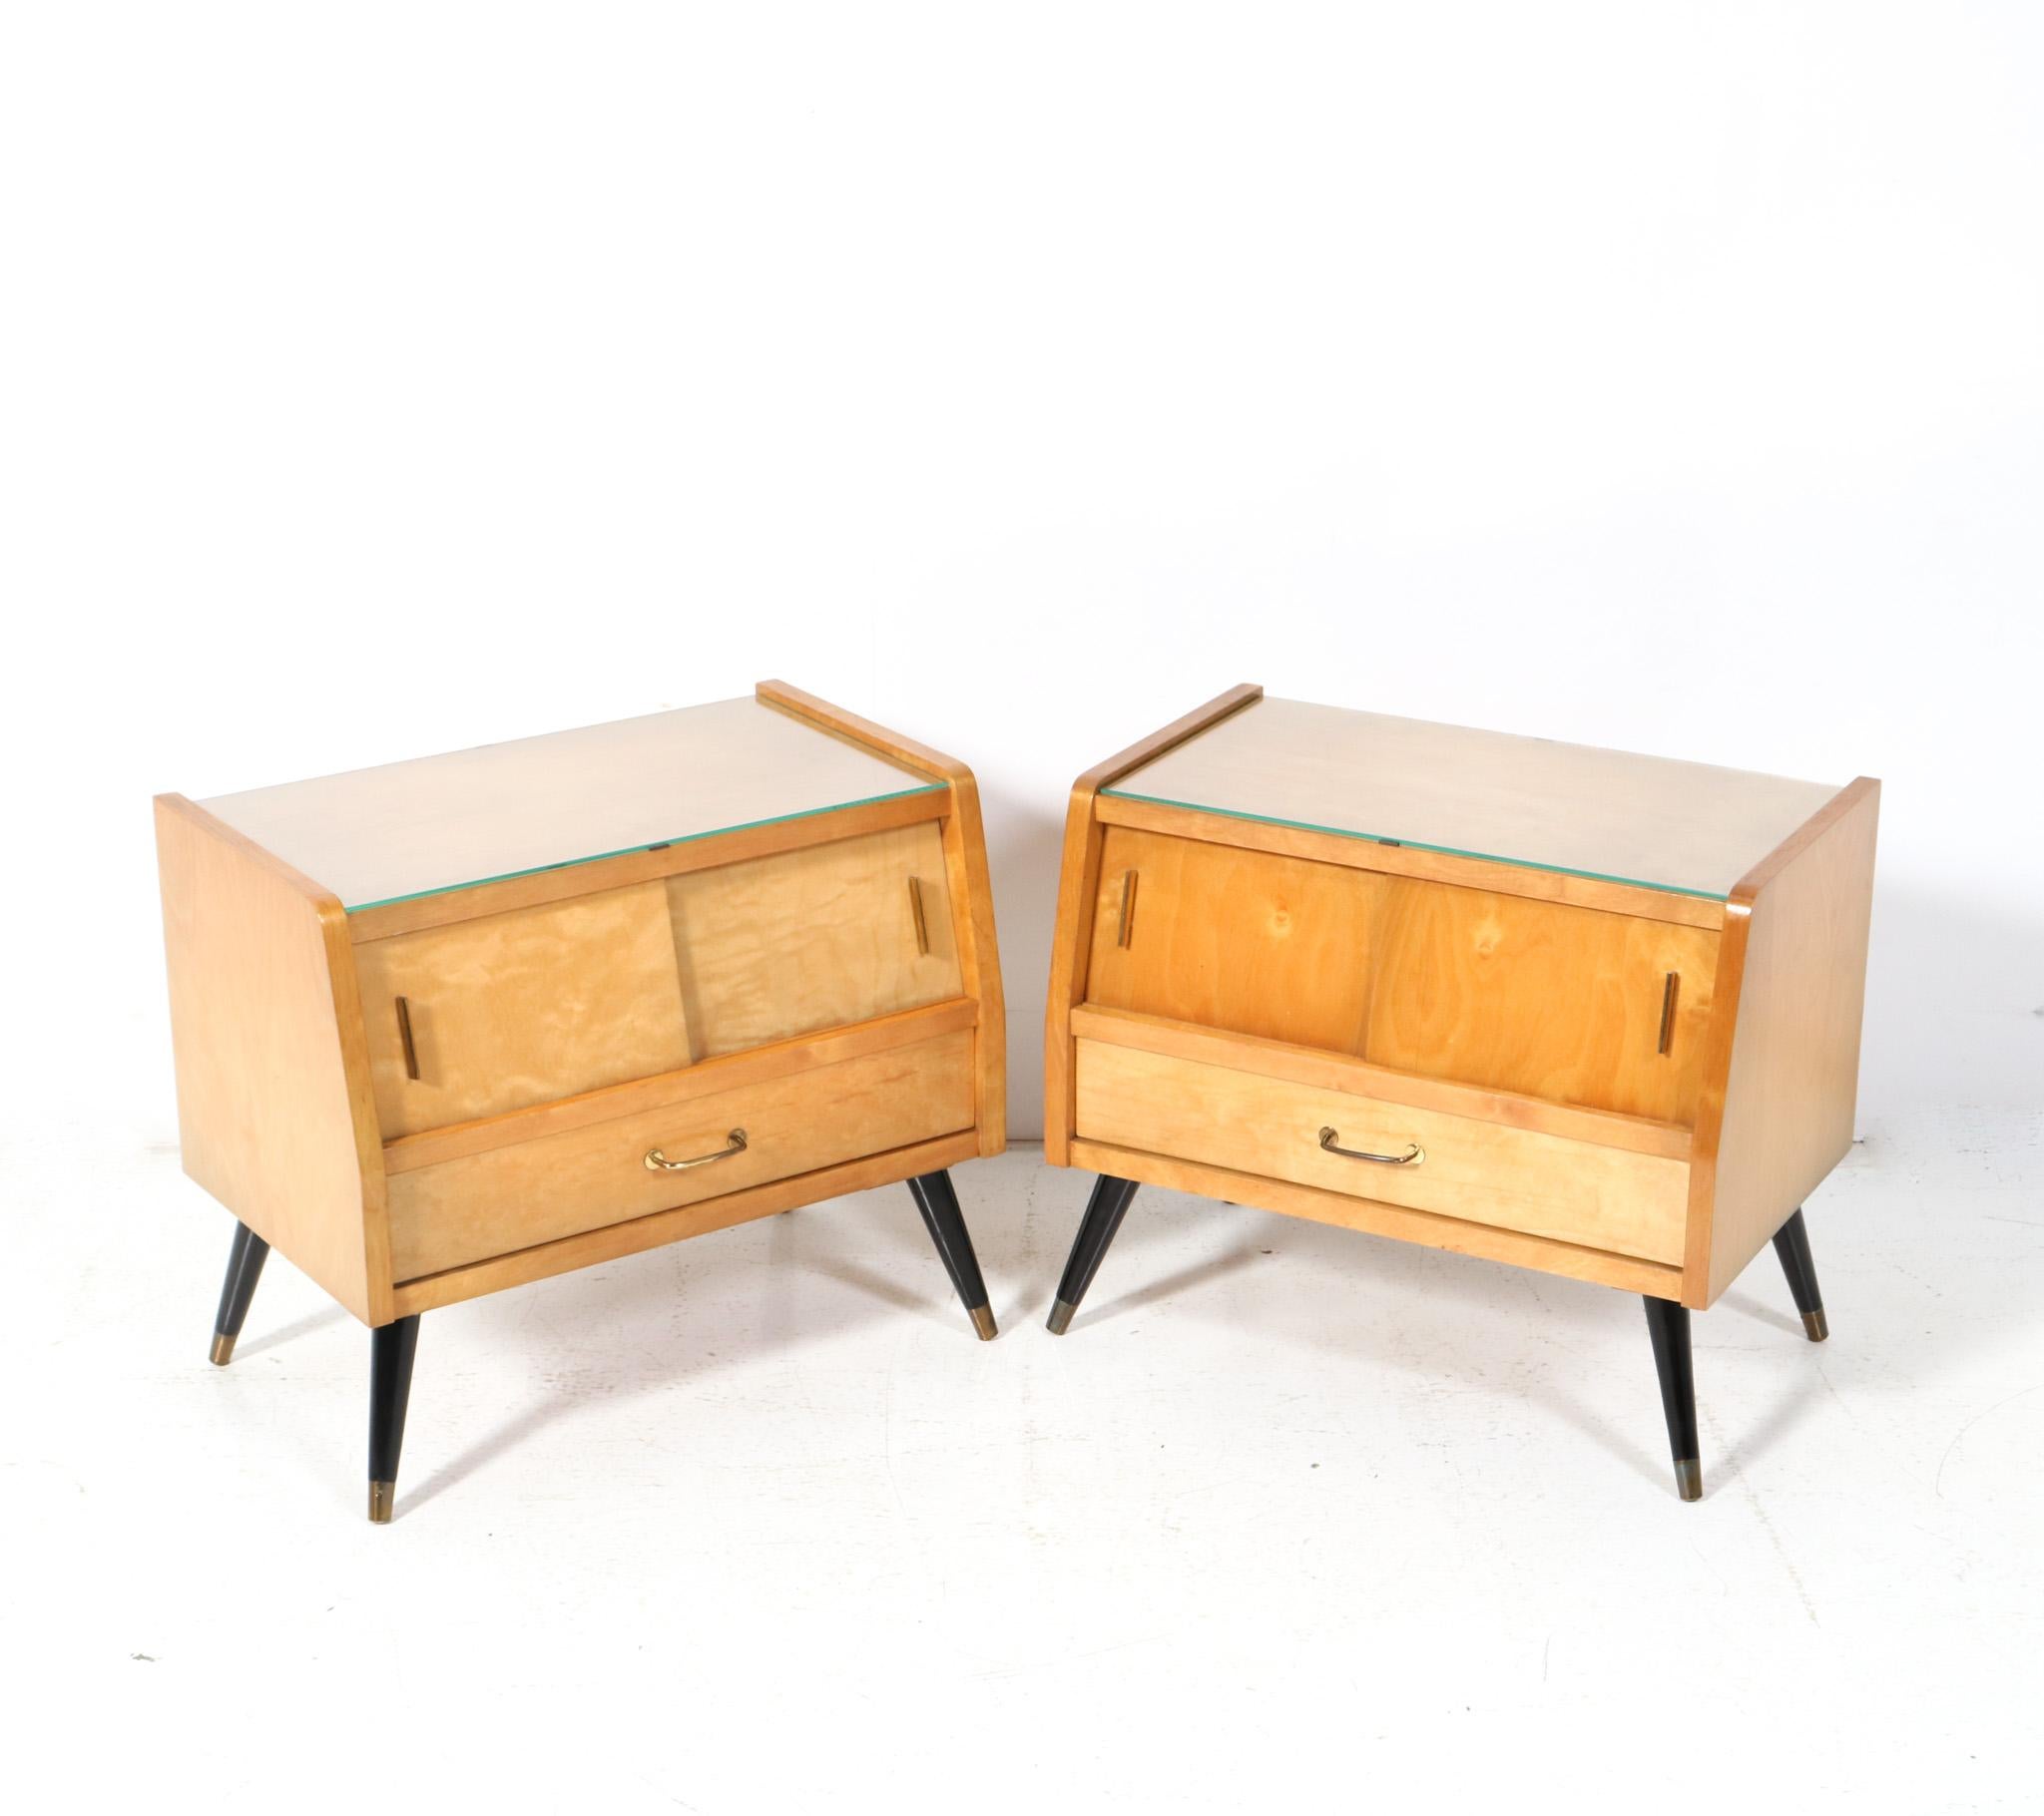  Mid-Century Modern Italian Nightstands or Bedside Tables, 1960s For Sale 1